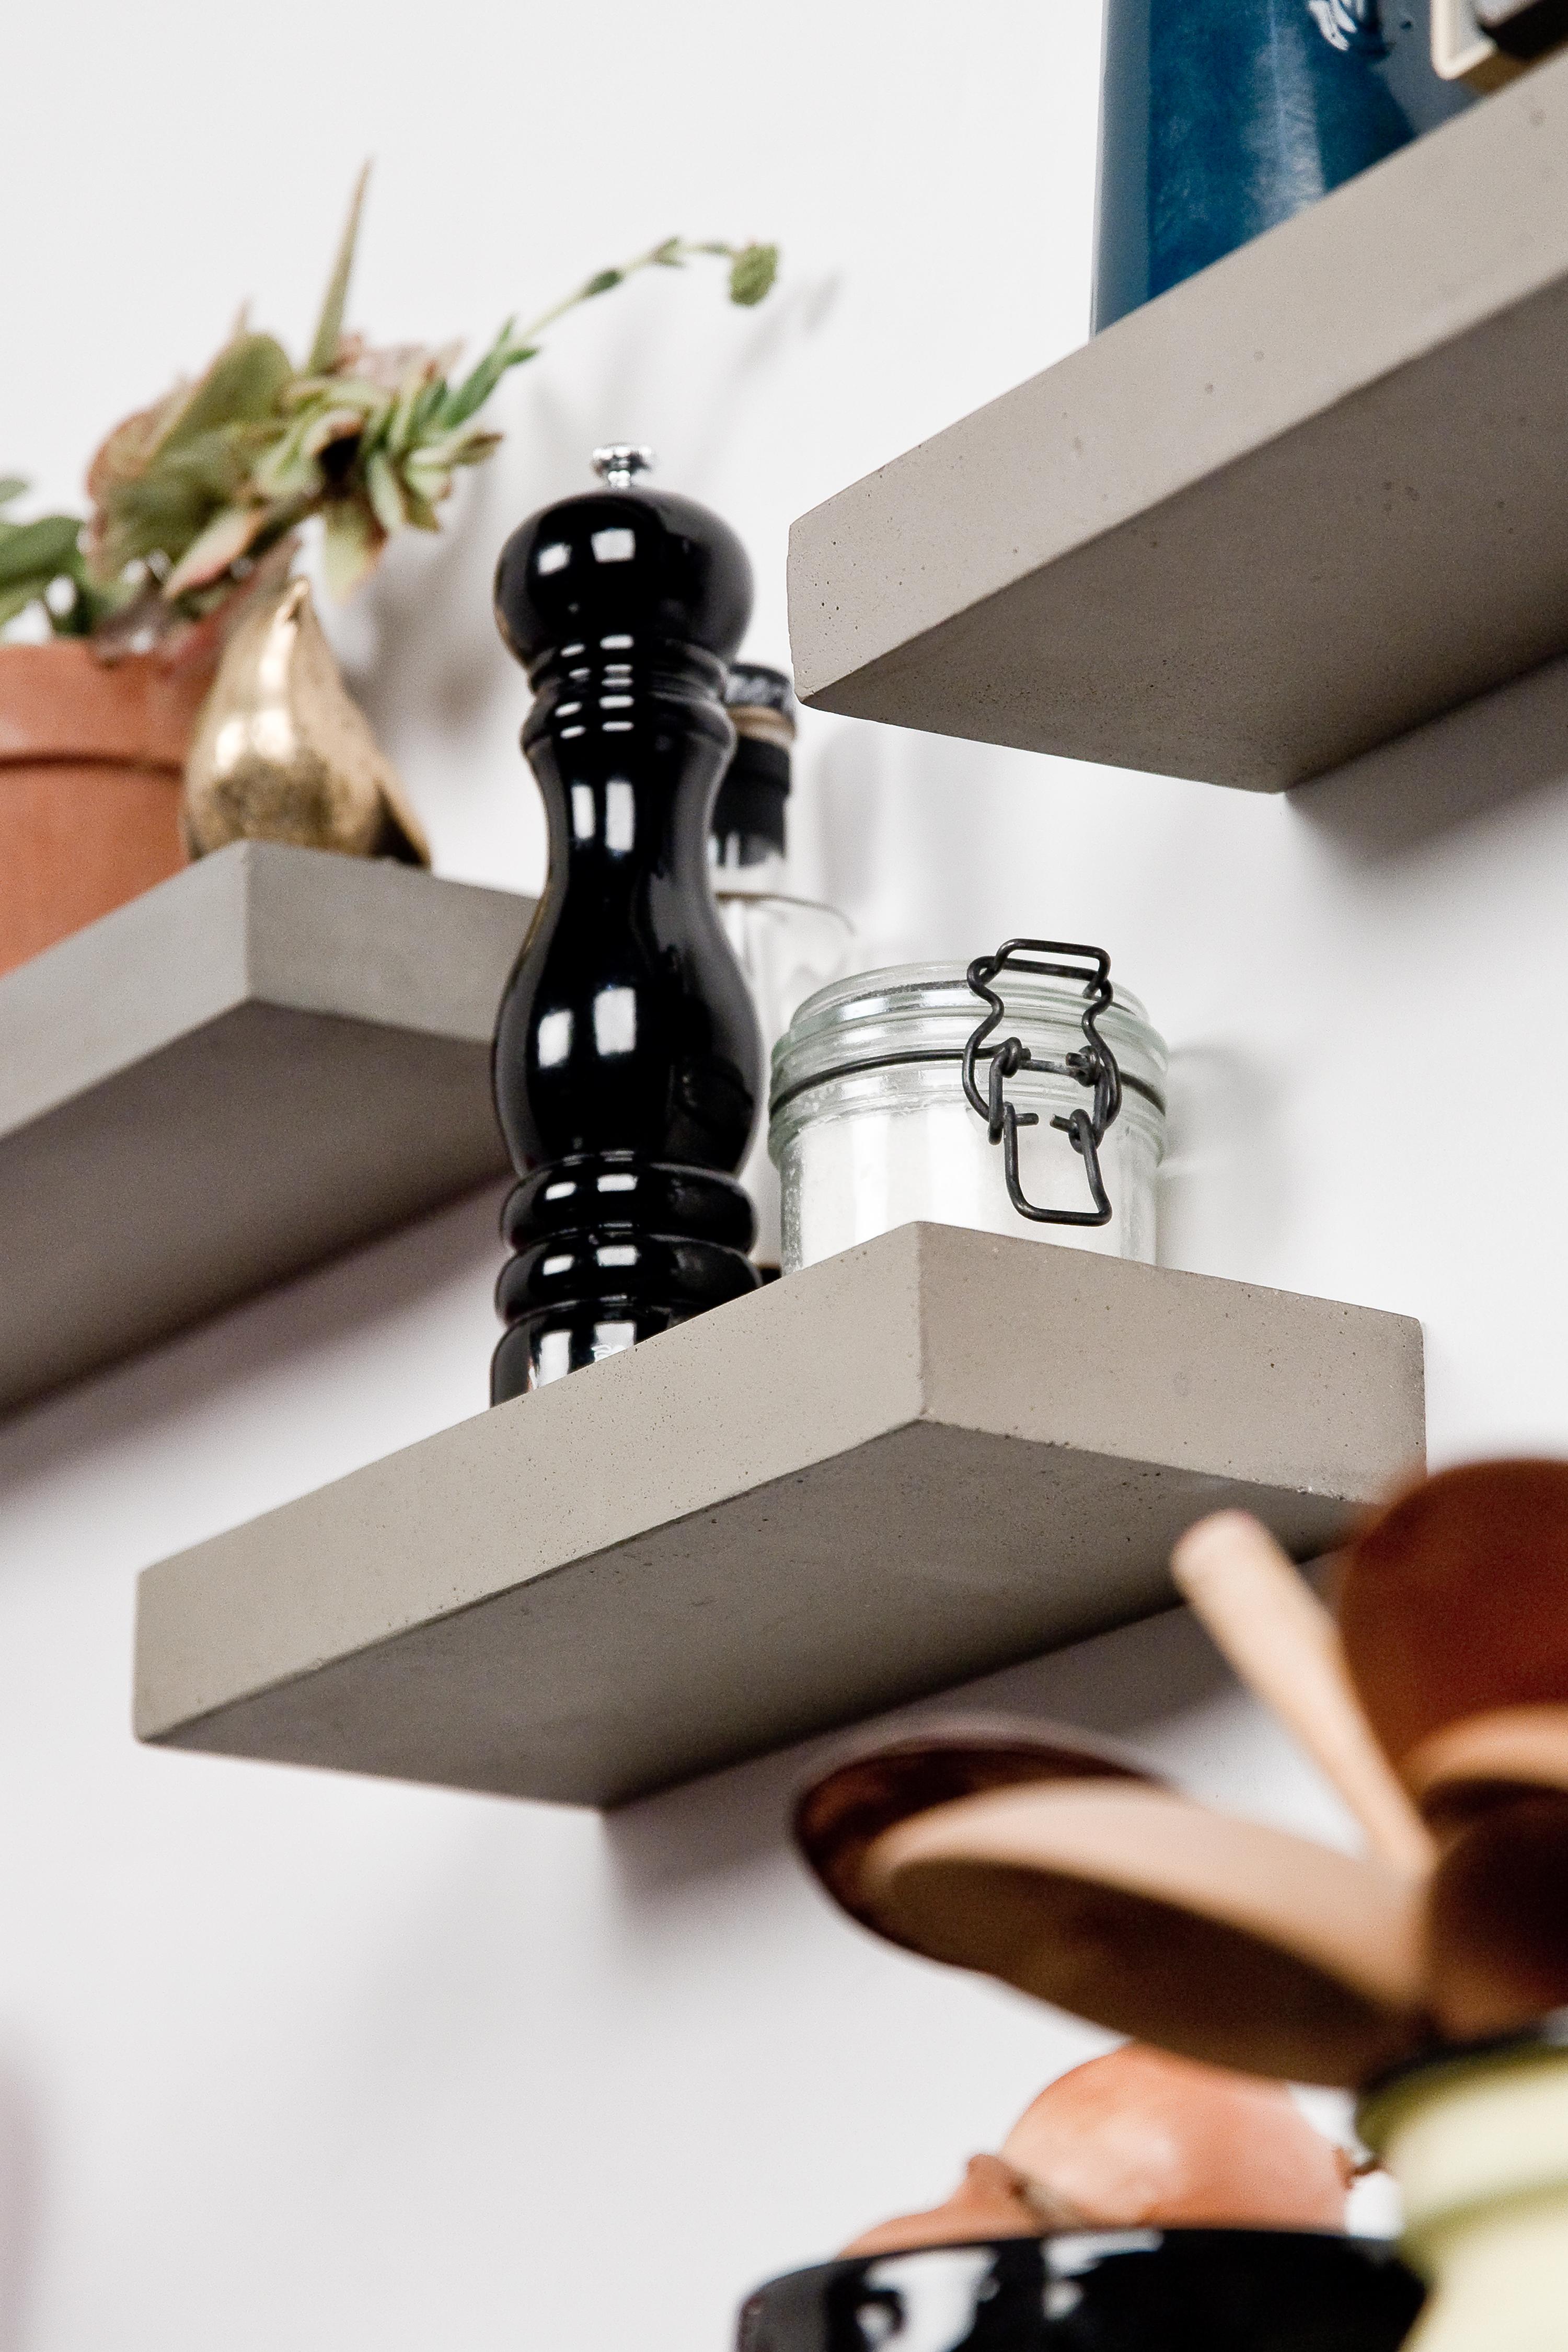 Its simple lines and the bold presence of raw concrete make this small cement shelf perfect to elegantly enhances a plant or the objet d’art that you will place on it.
Some will use it as a bedside table or as a minimalist toilet paper shelf. And